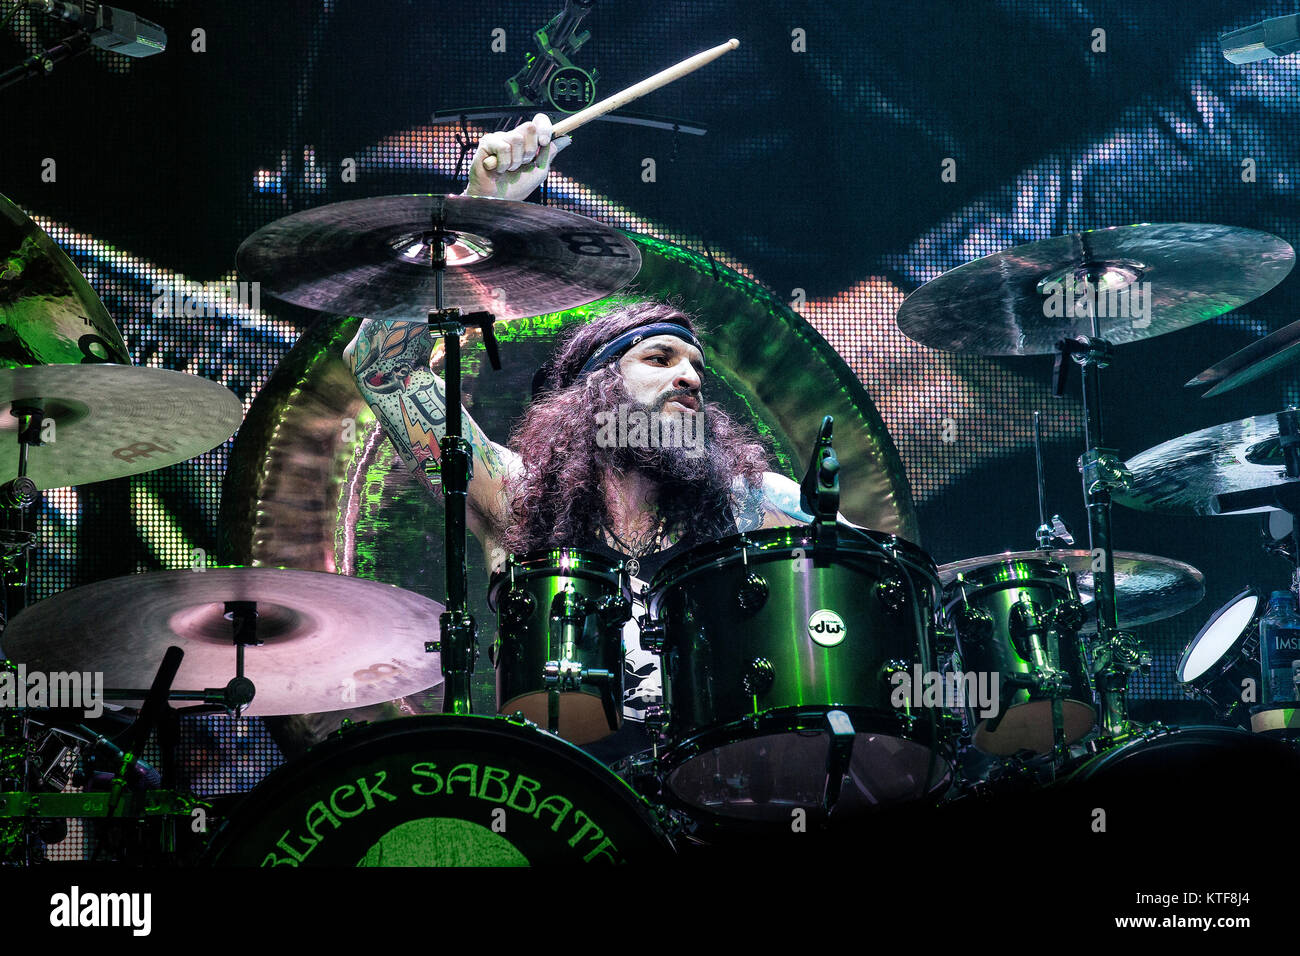 The English rock band Black Sabbath performs a live concert at Telenor  Arena in Oslo. Here musician Tommy Clufetos on drums is seen live on stage.  Norway, 24/11 2013 Stock Photo - Alamy